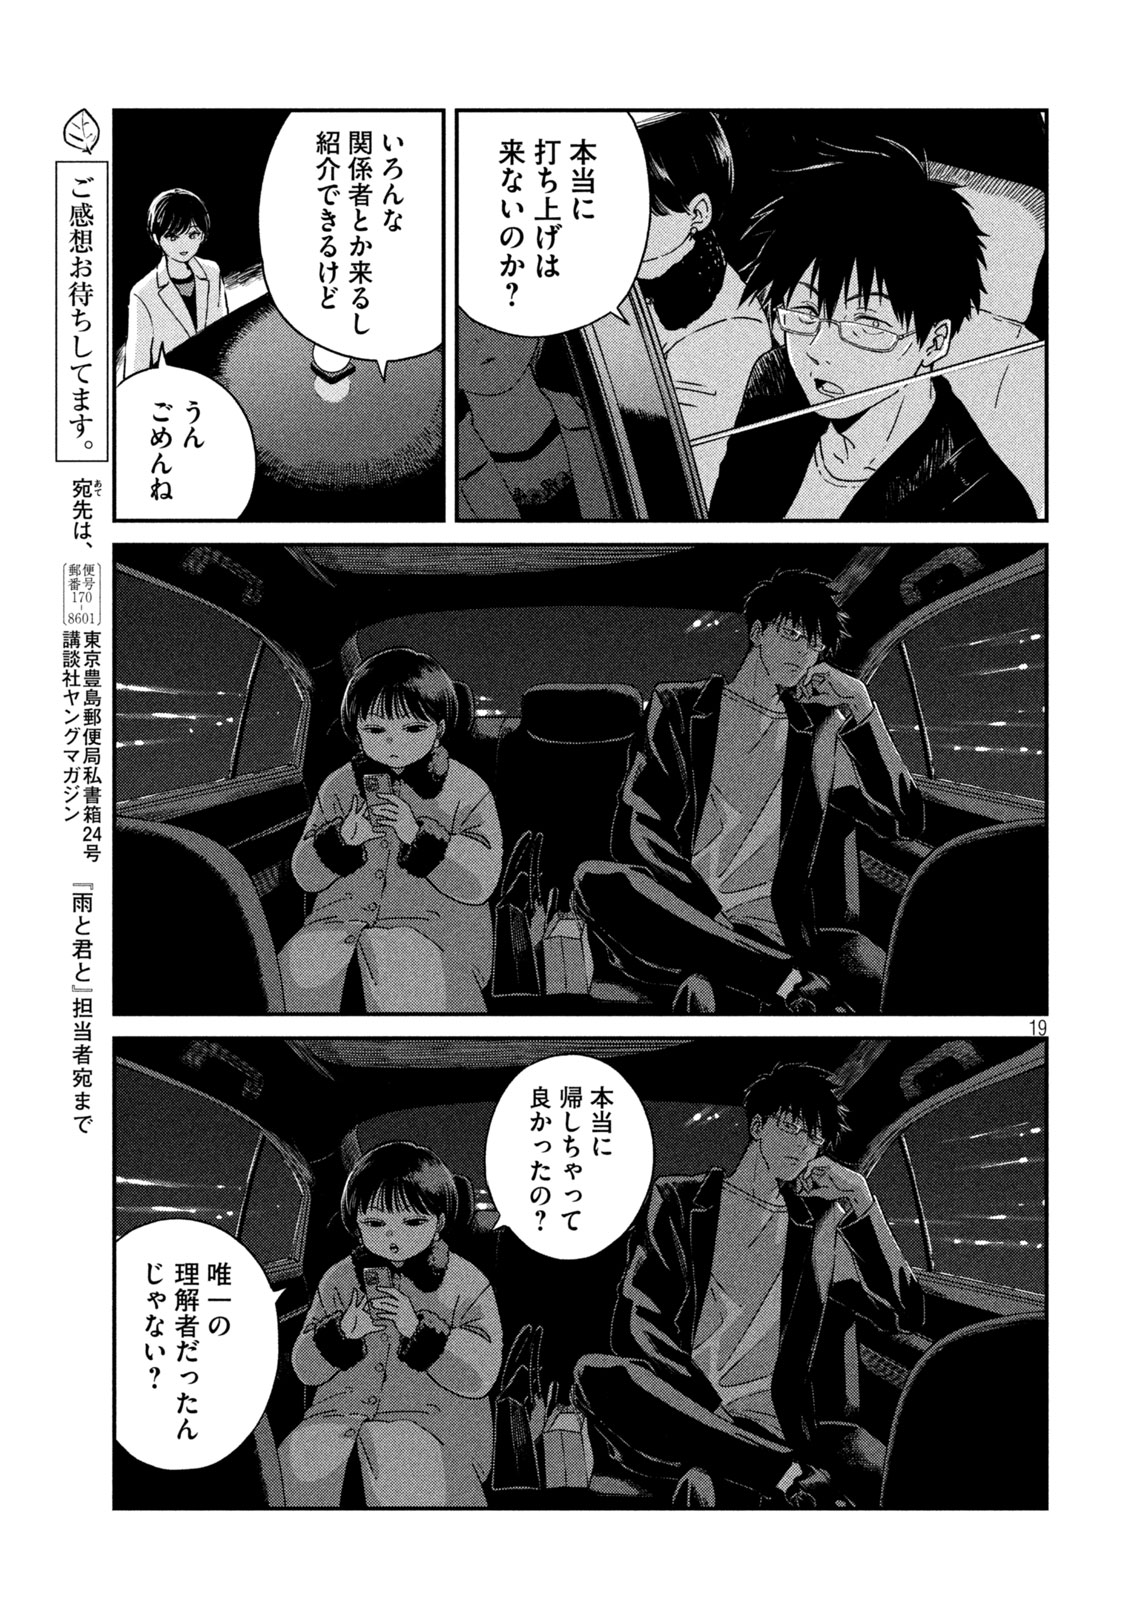 Ame to Kimi to - Chapter 118 - Page 19